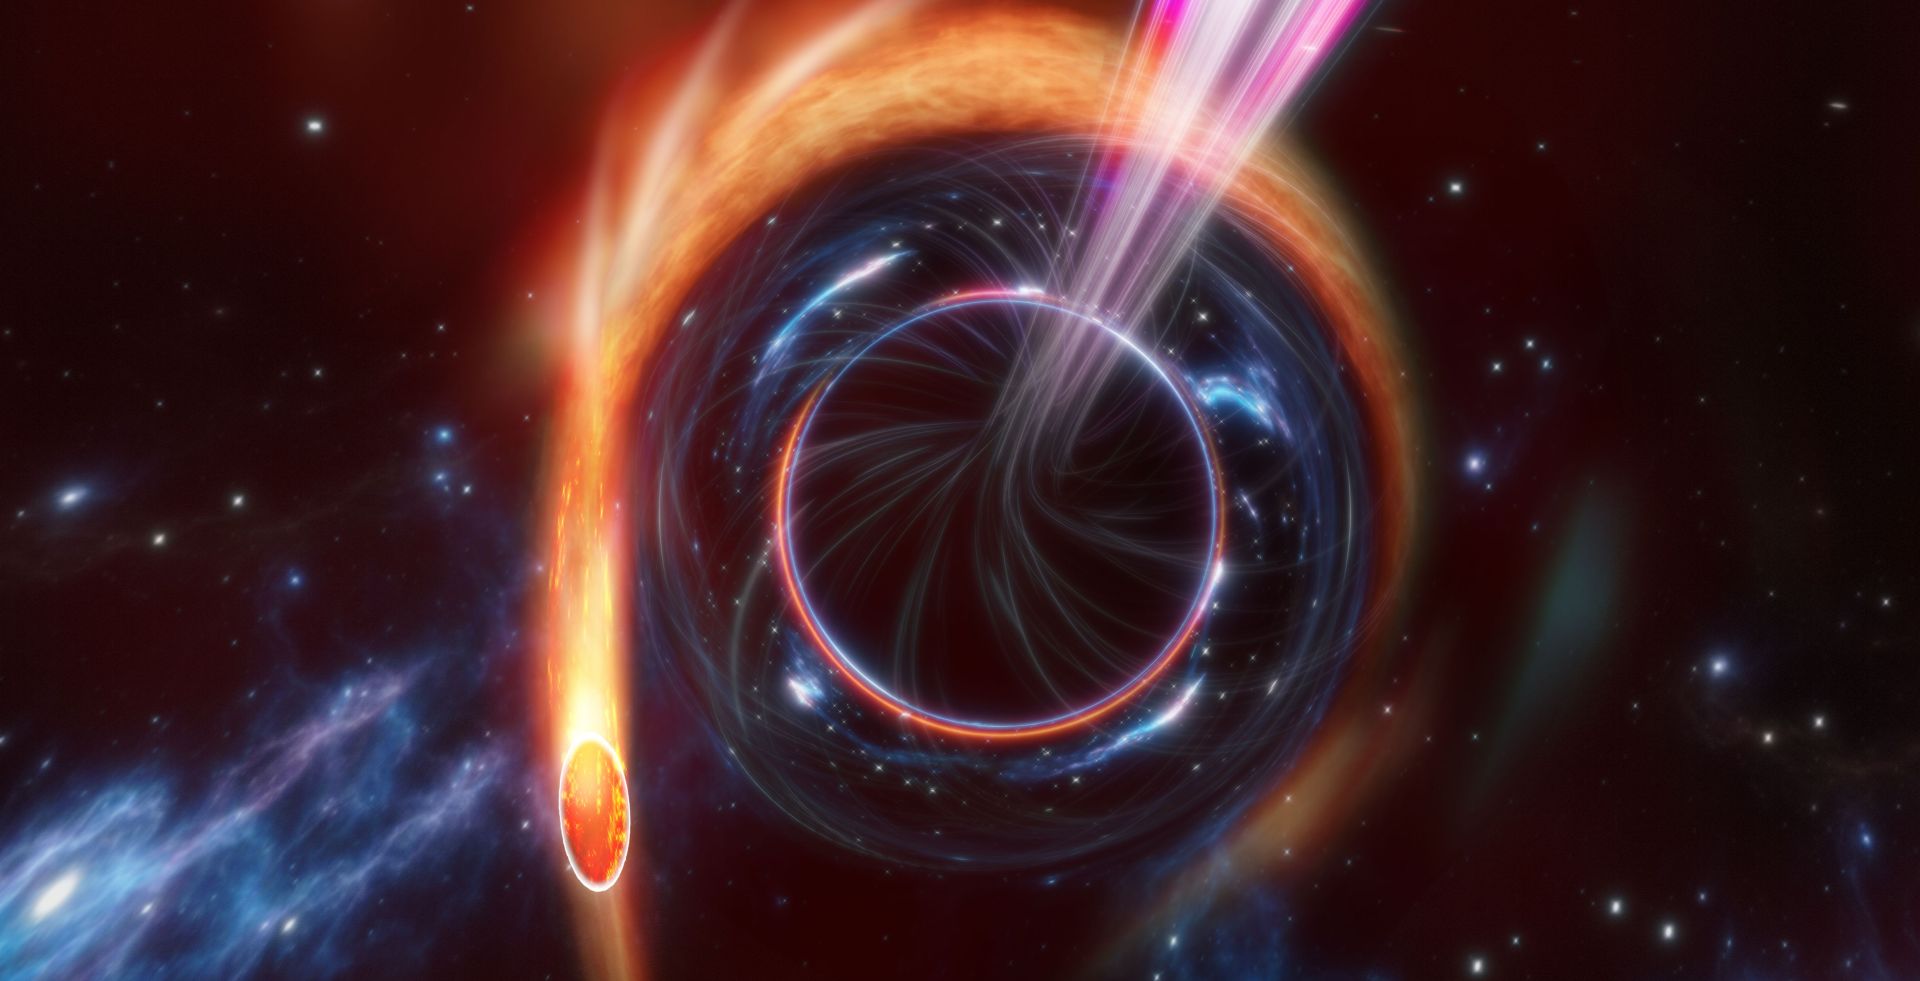 A Black Hole Consumed a Star and Released the Light of a Trillion Suns